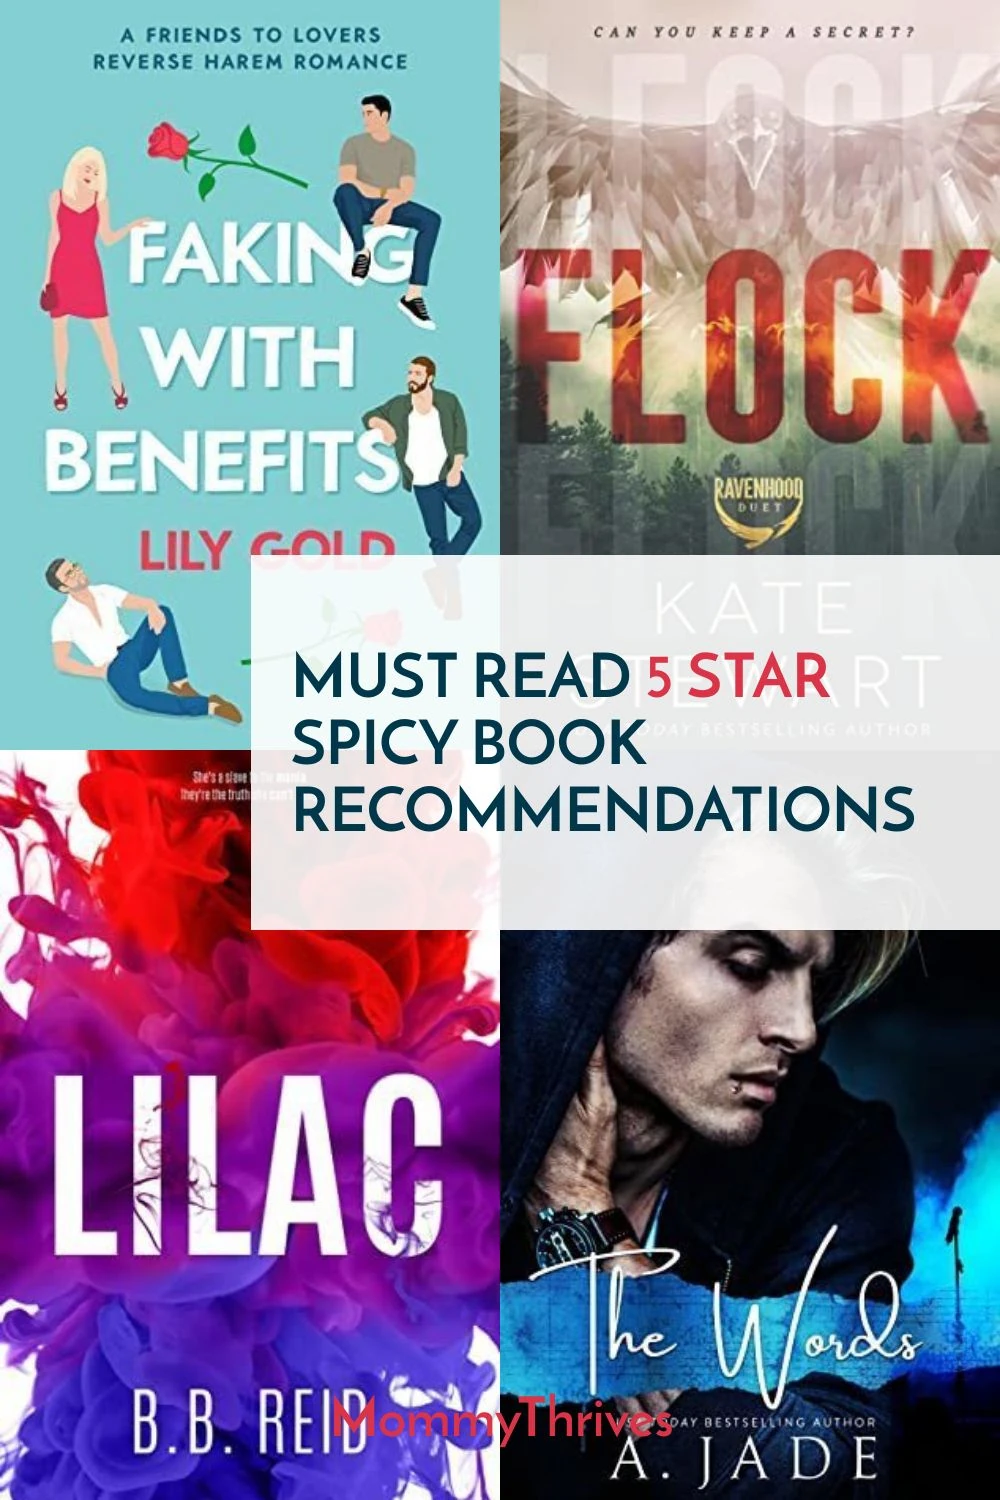 Spicy Book Recommendations - 5 Star Spicy Book Recommendations - Must Read Spicy Books